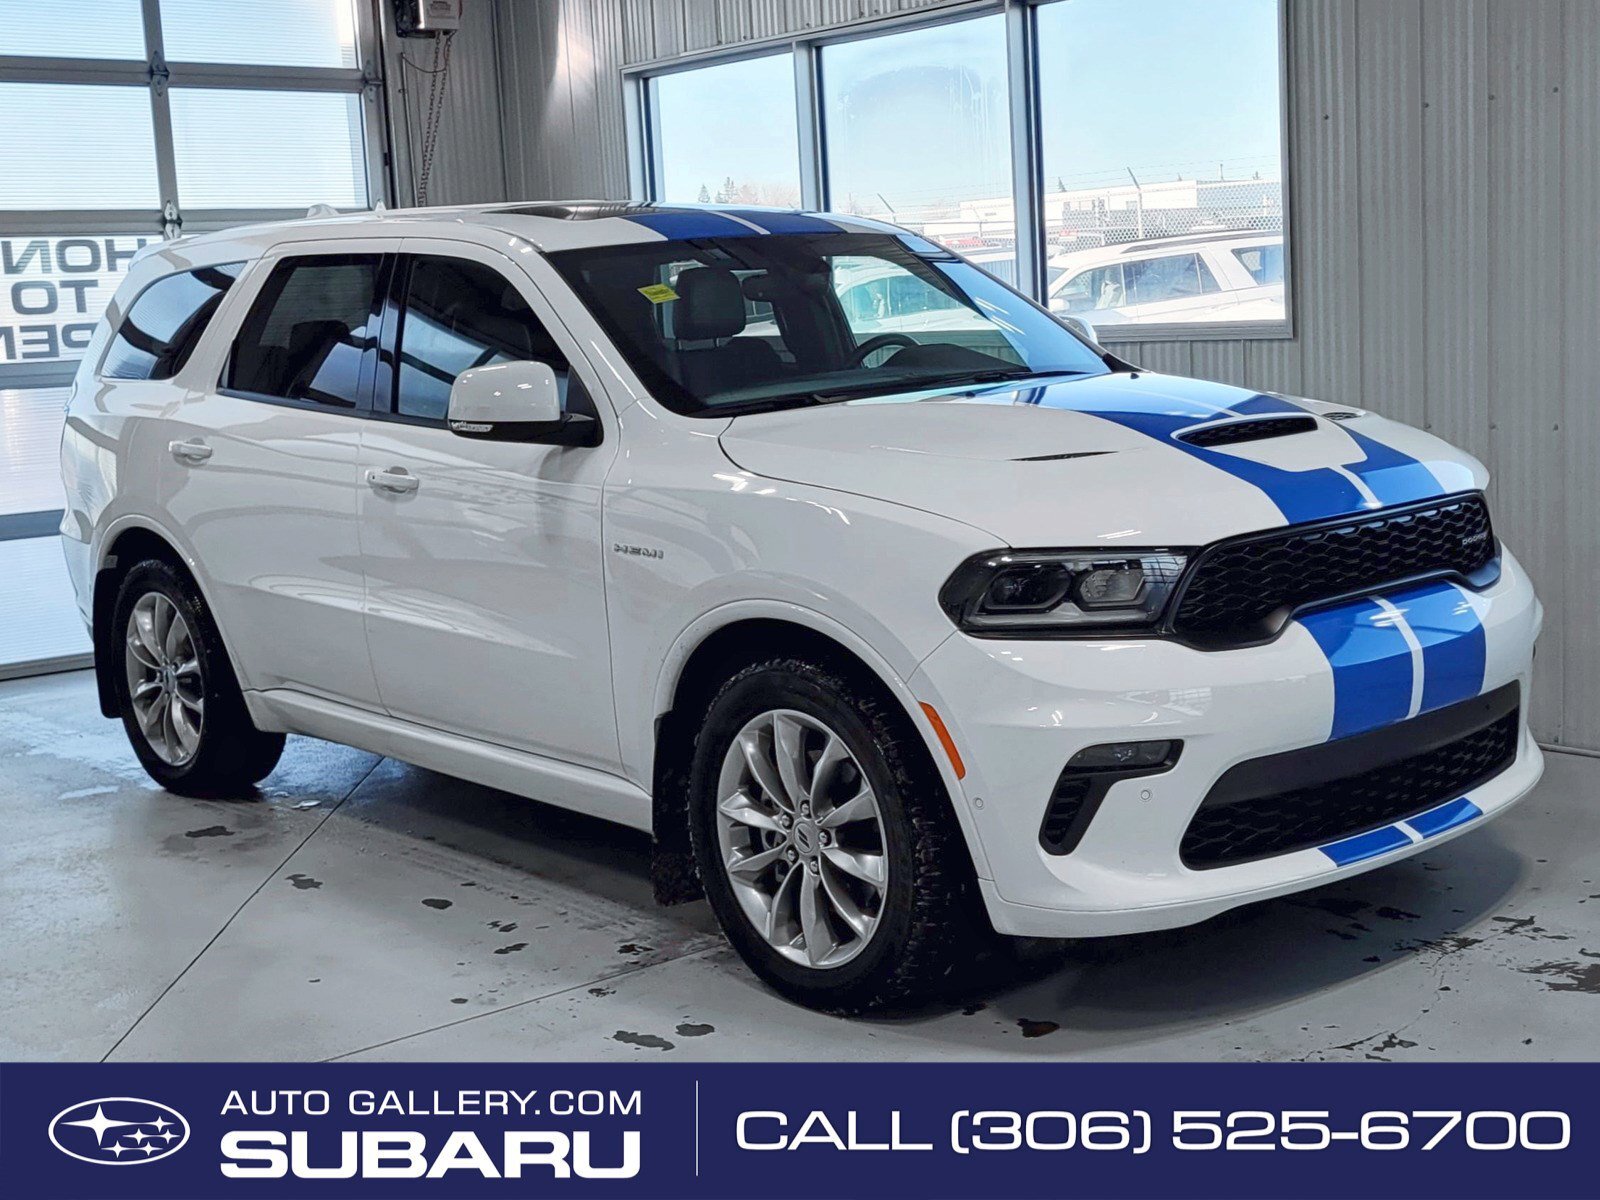 2022 Dodge Durango R/T AWD | PERFORMANCE PACKAGE | LOADED | 360 HP